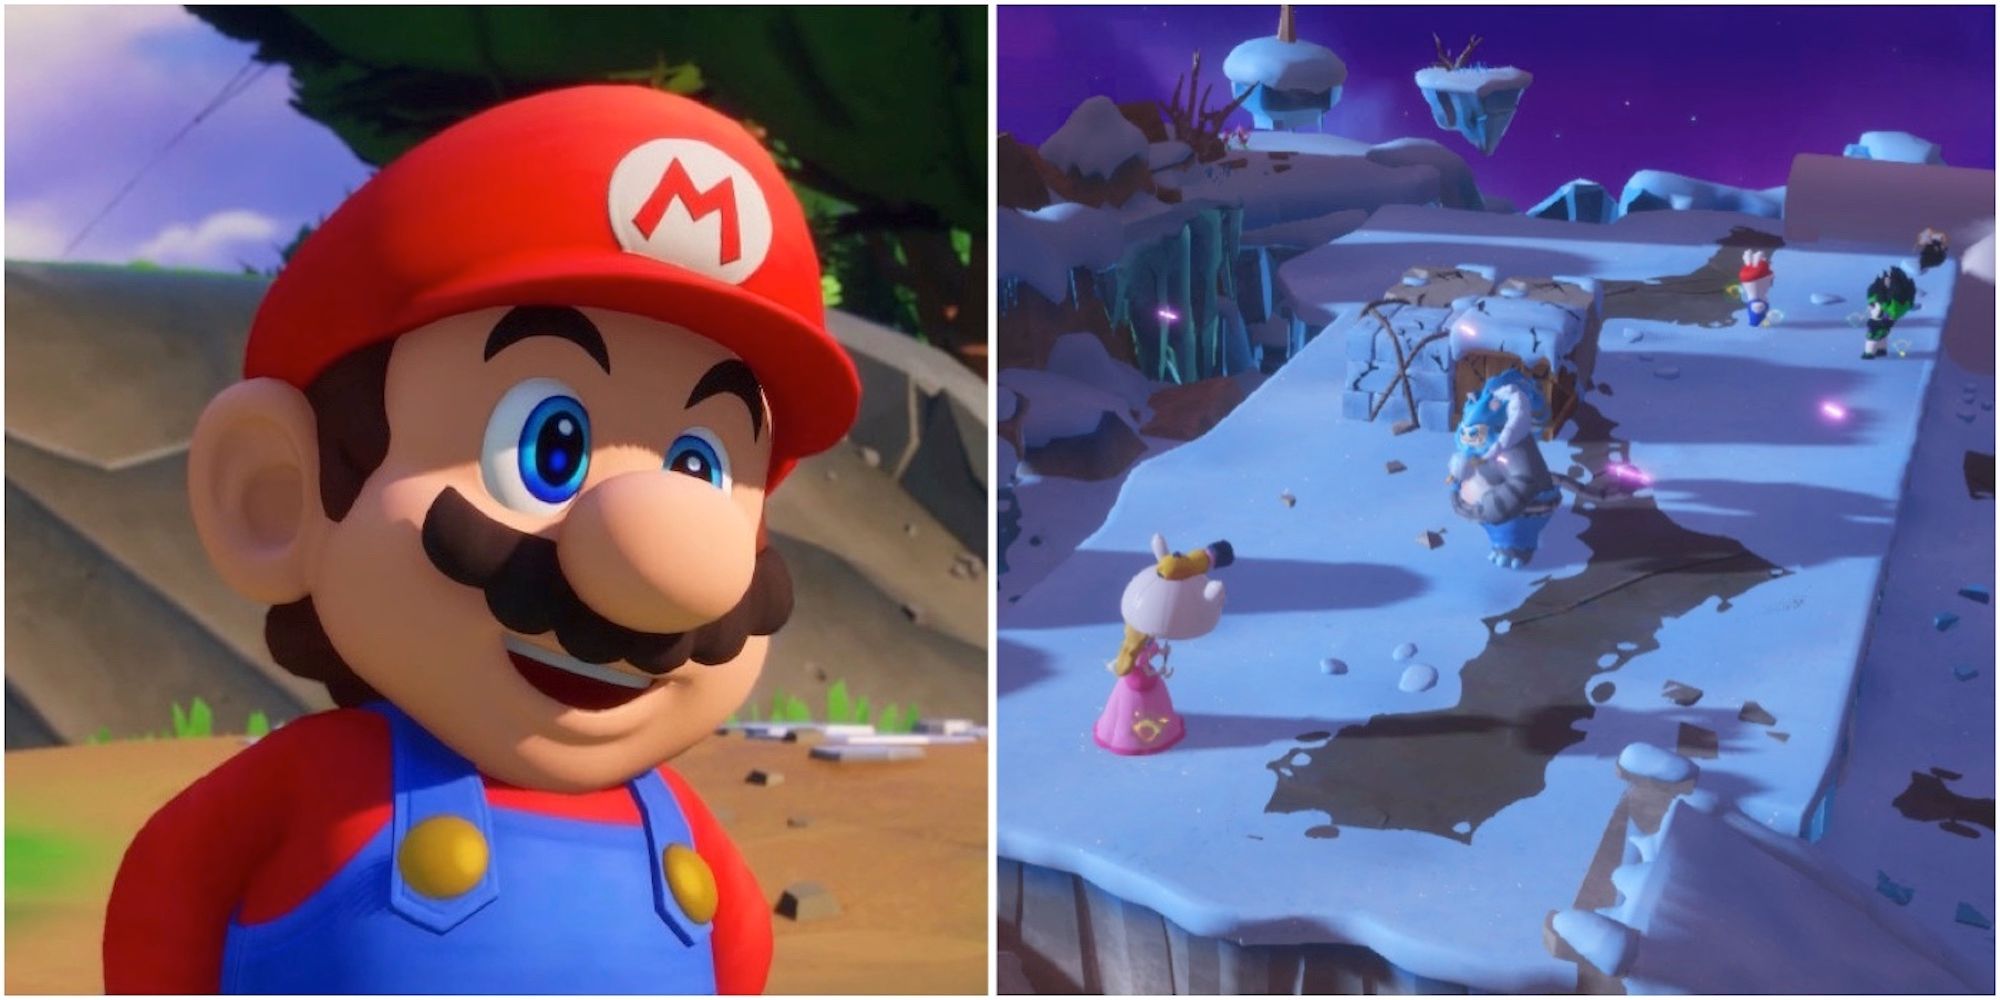 Mario and fighting a battle in Mario + Rabbids Sparks of Hope